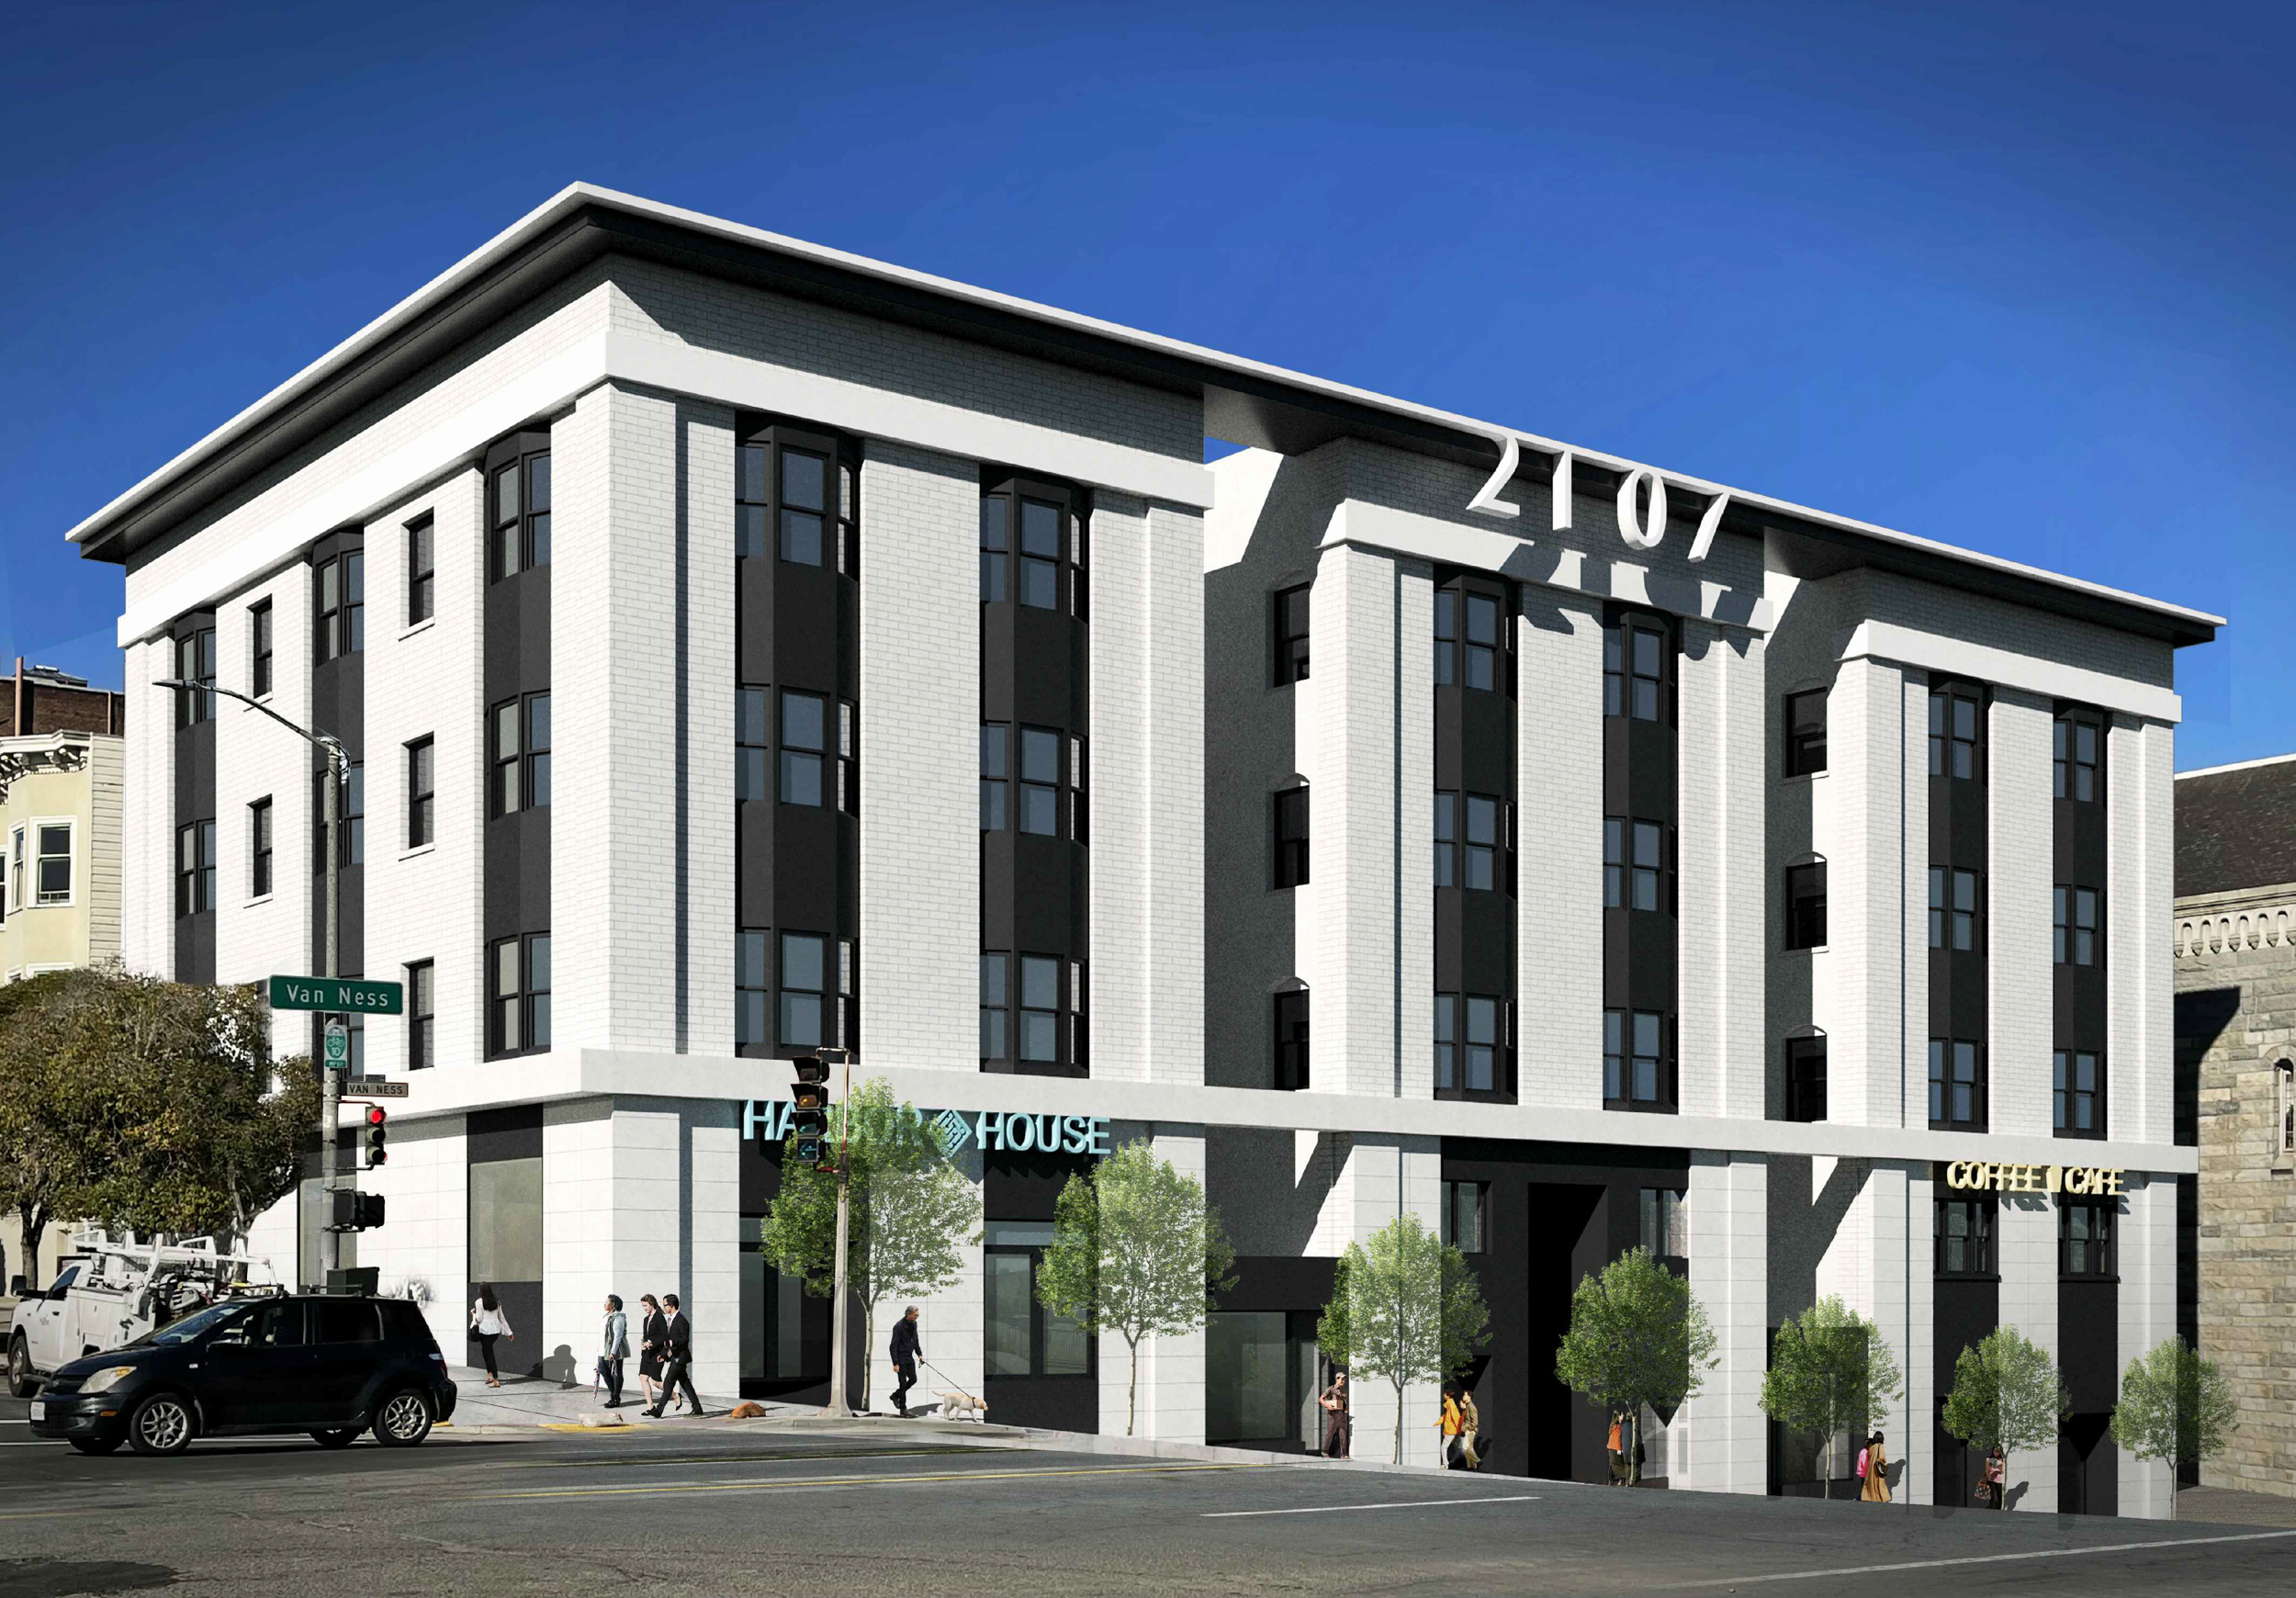 2107 Van Ness Avenue seen from across the street, rendering by Stanley Saitowitz | Natoma Architects